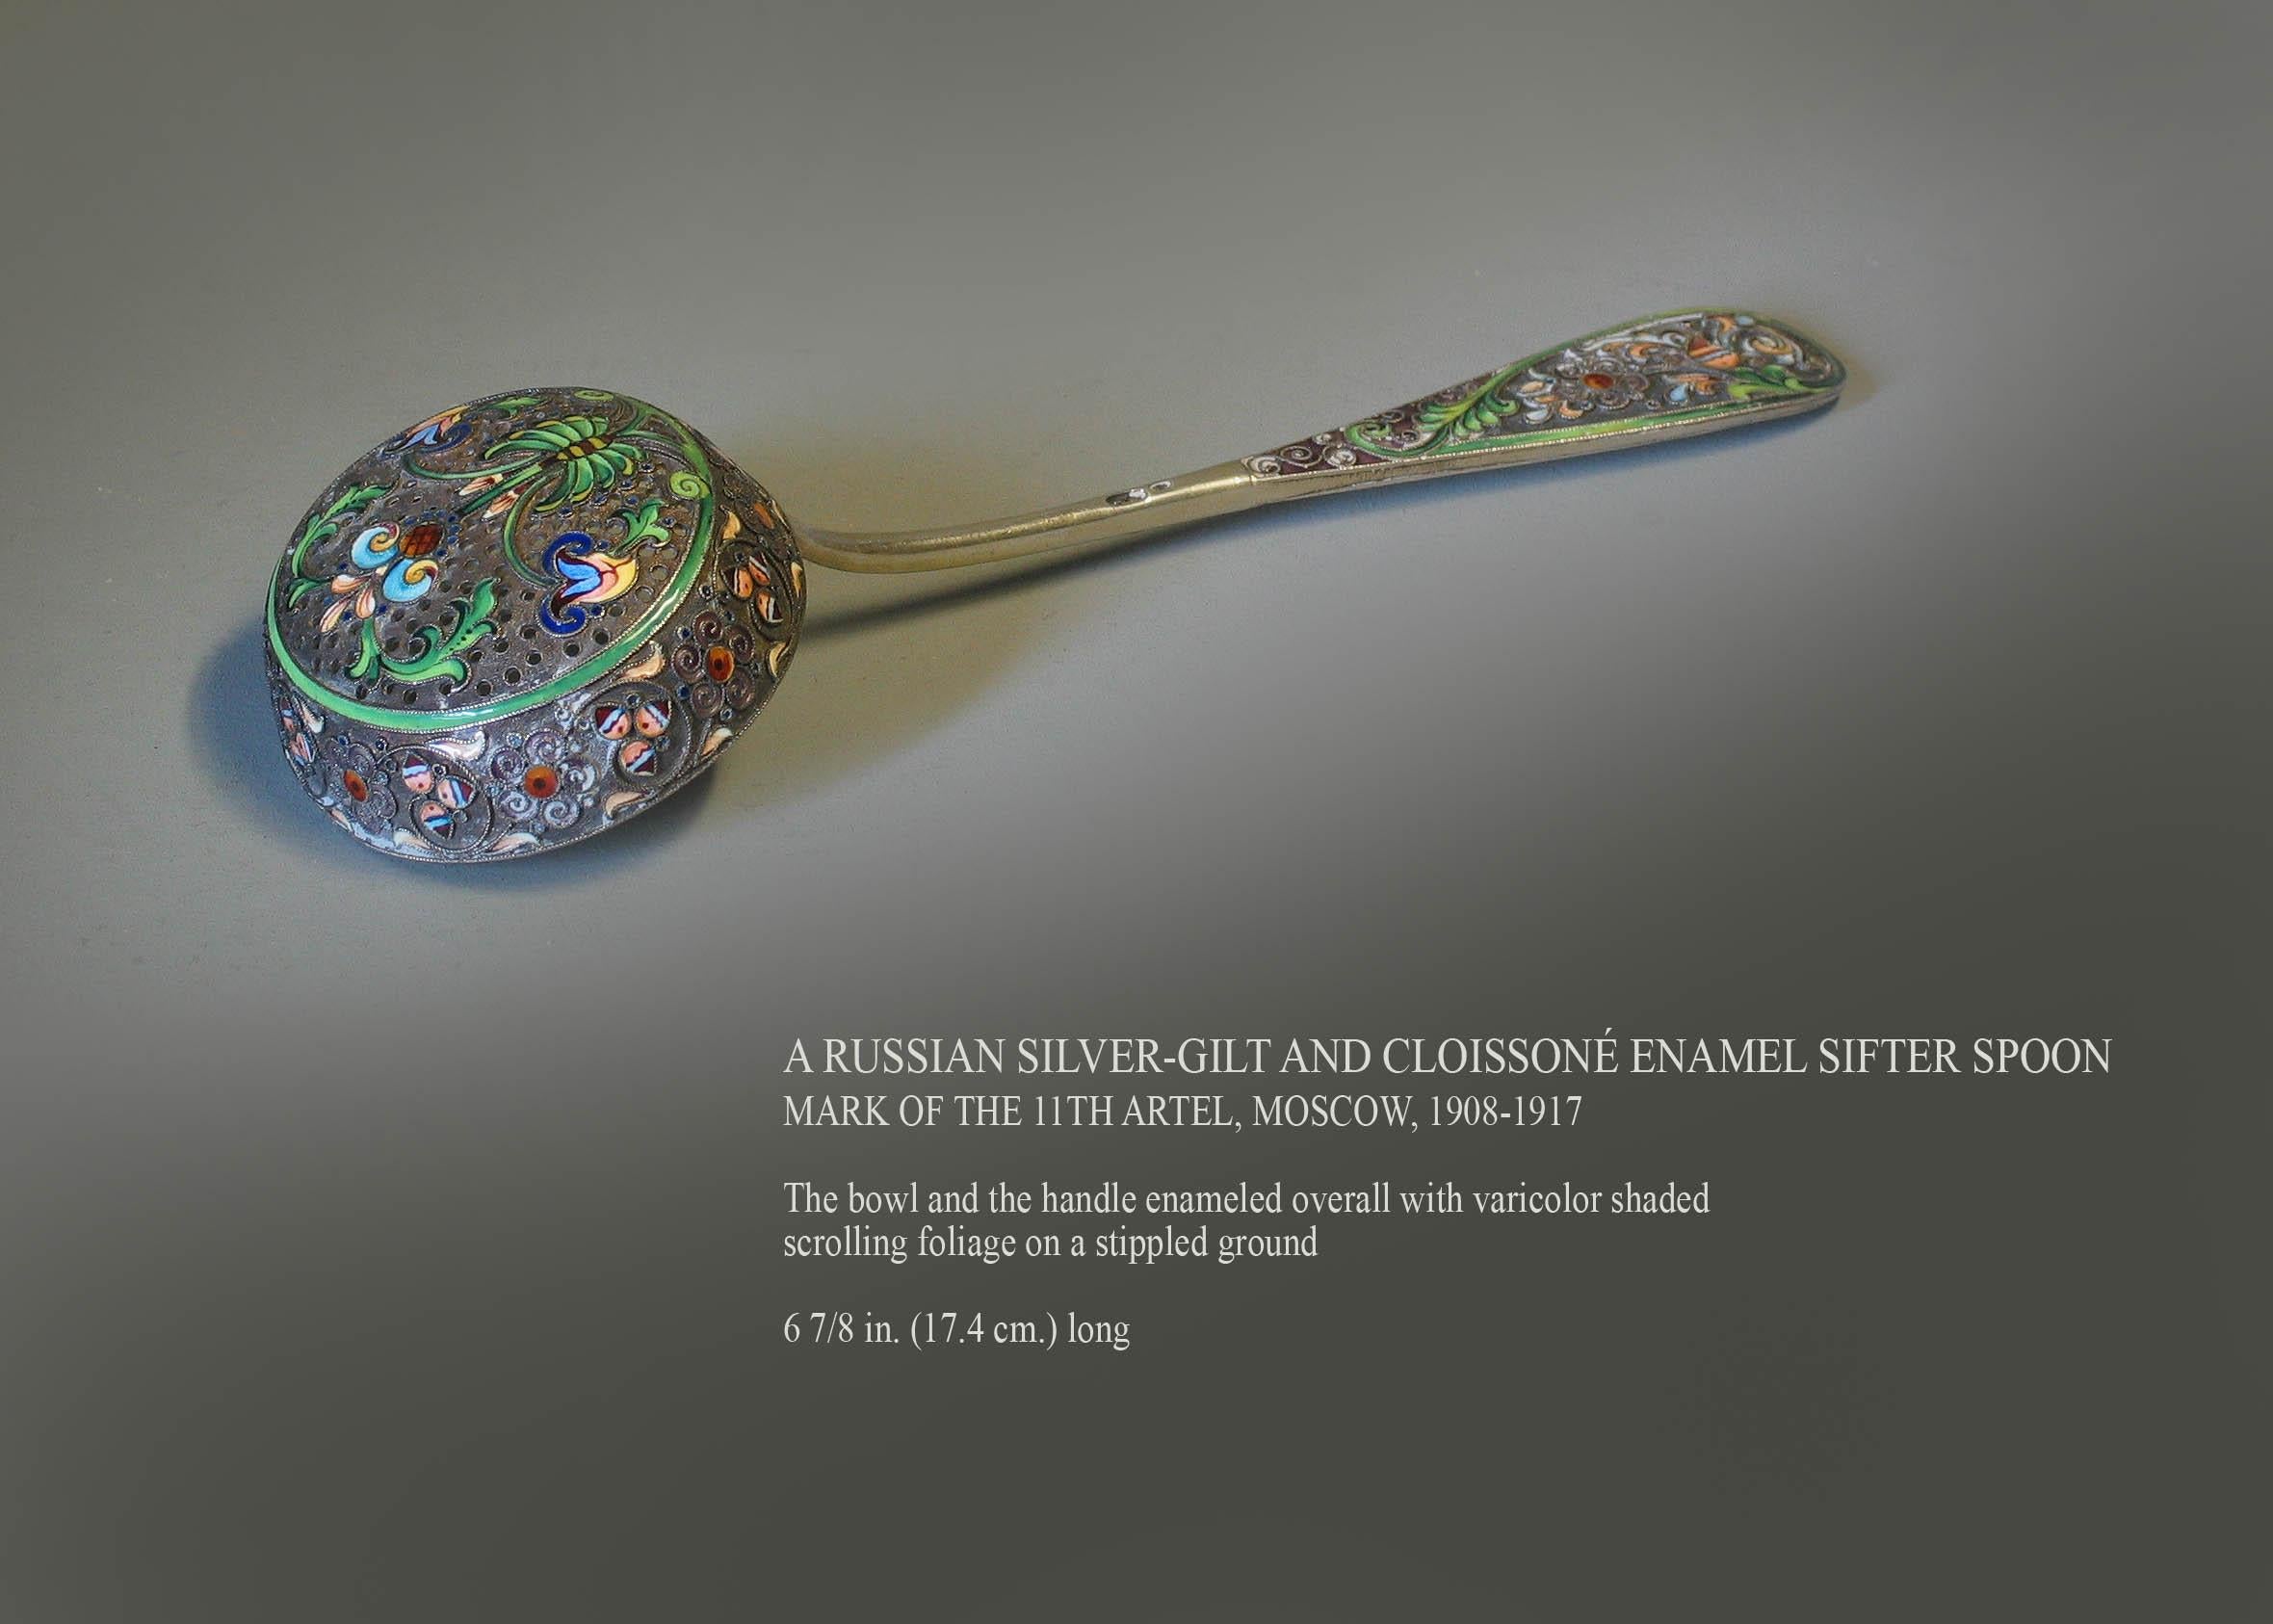 A Russian silver-gilt and Cloissoné enamel sifter spoon
Mark of the 11th artel, Moscow, 1908-1917

The bowl and the handle enameled overall with varicolor shaded 
scrolling foliage on a stippled ground, exceptional workmanship which is expected